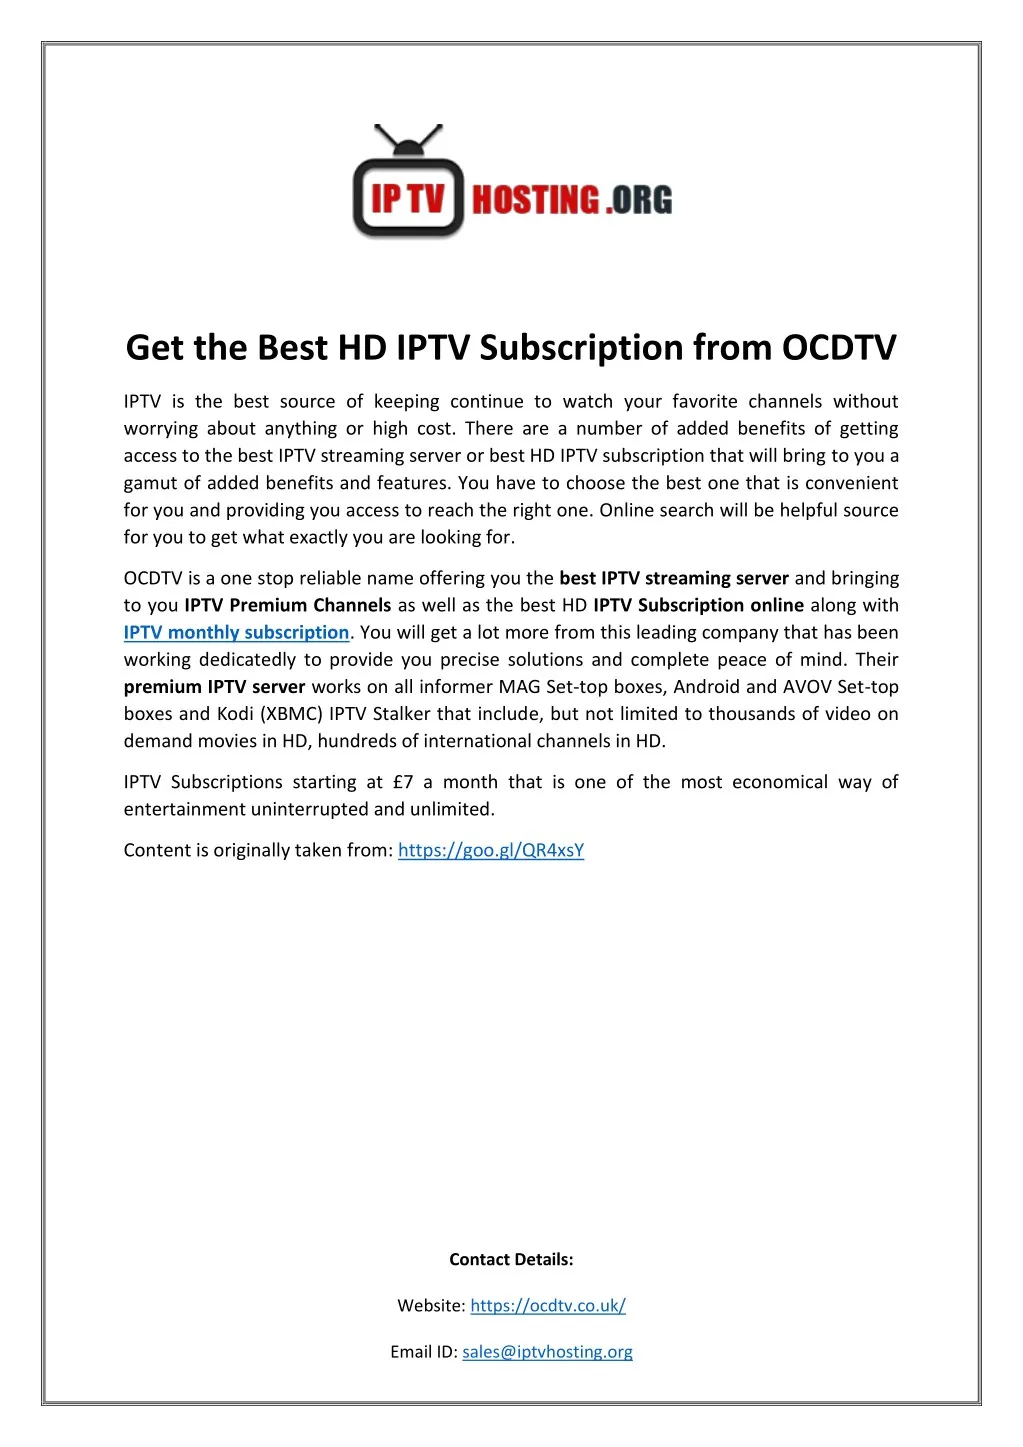 get the best hd iptv subscription from ocdtv